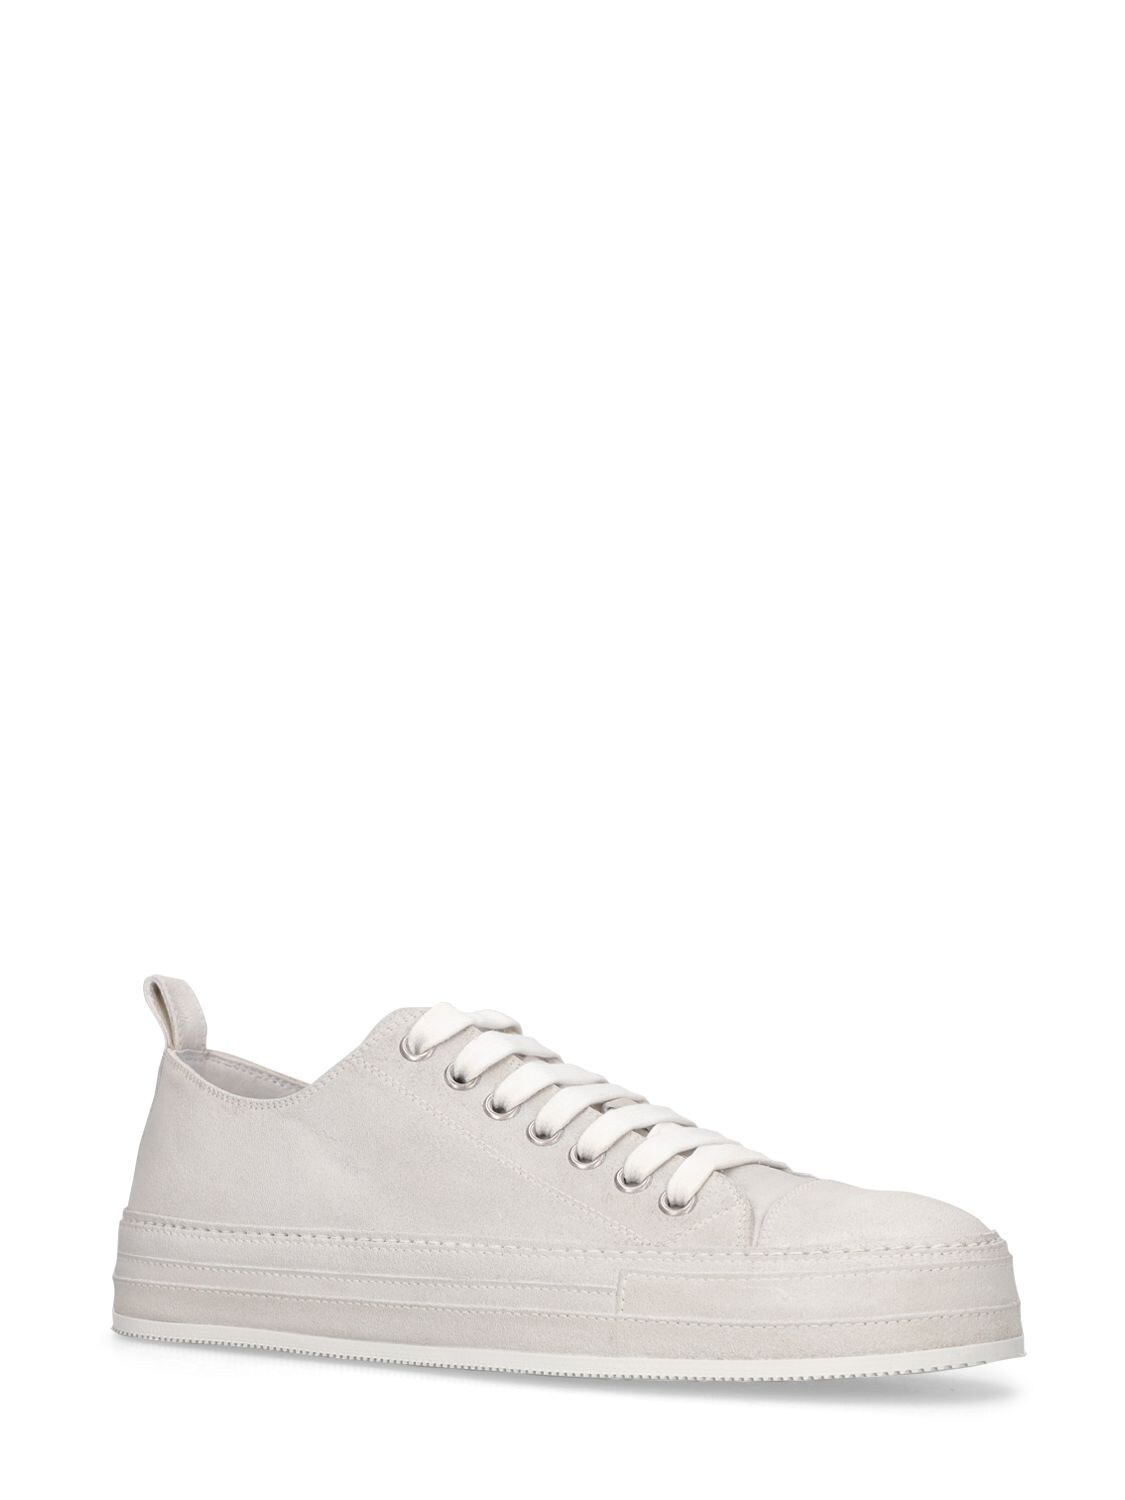 Ann Demeulemeester Gert Low-top Sneakers In White | ModeSens